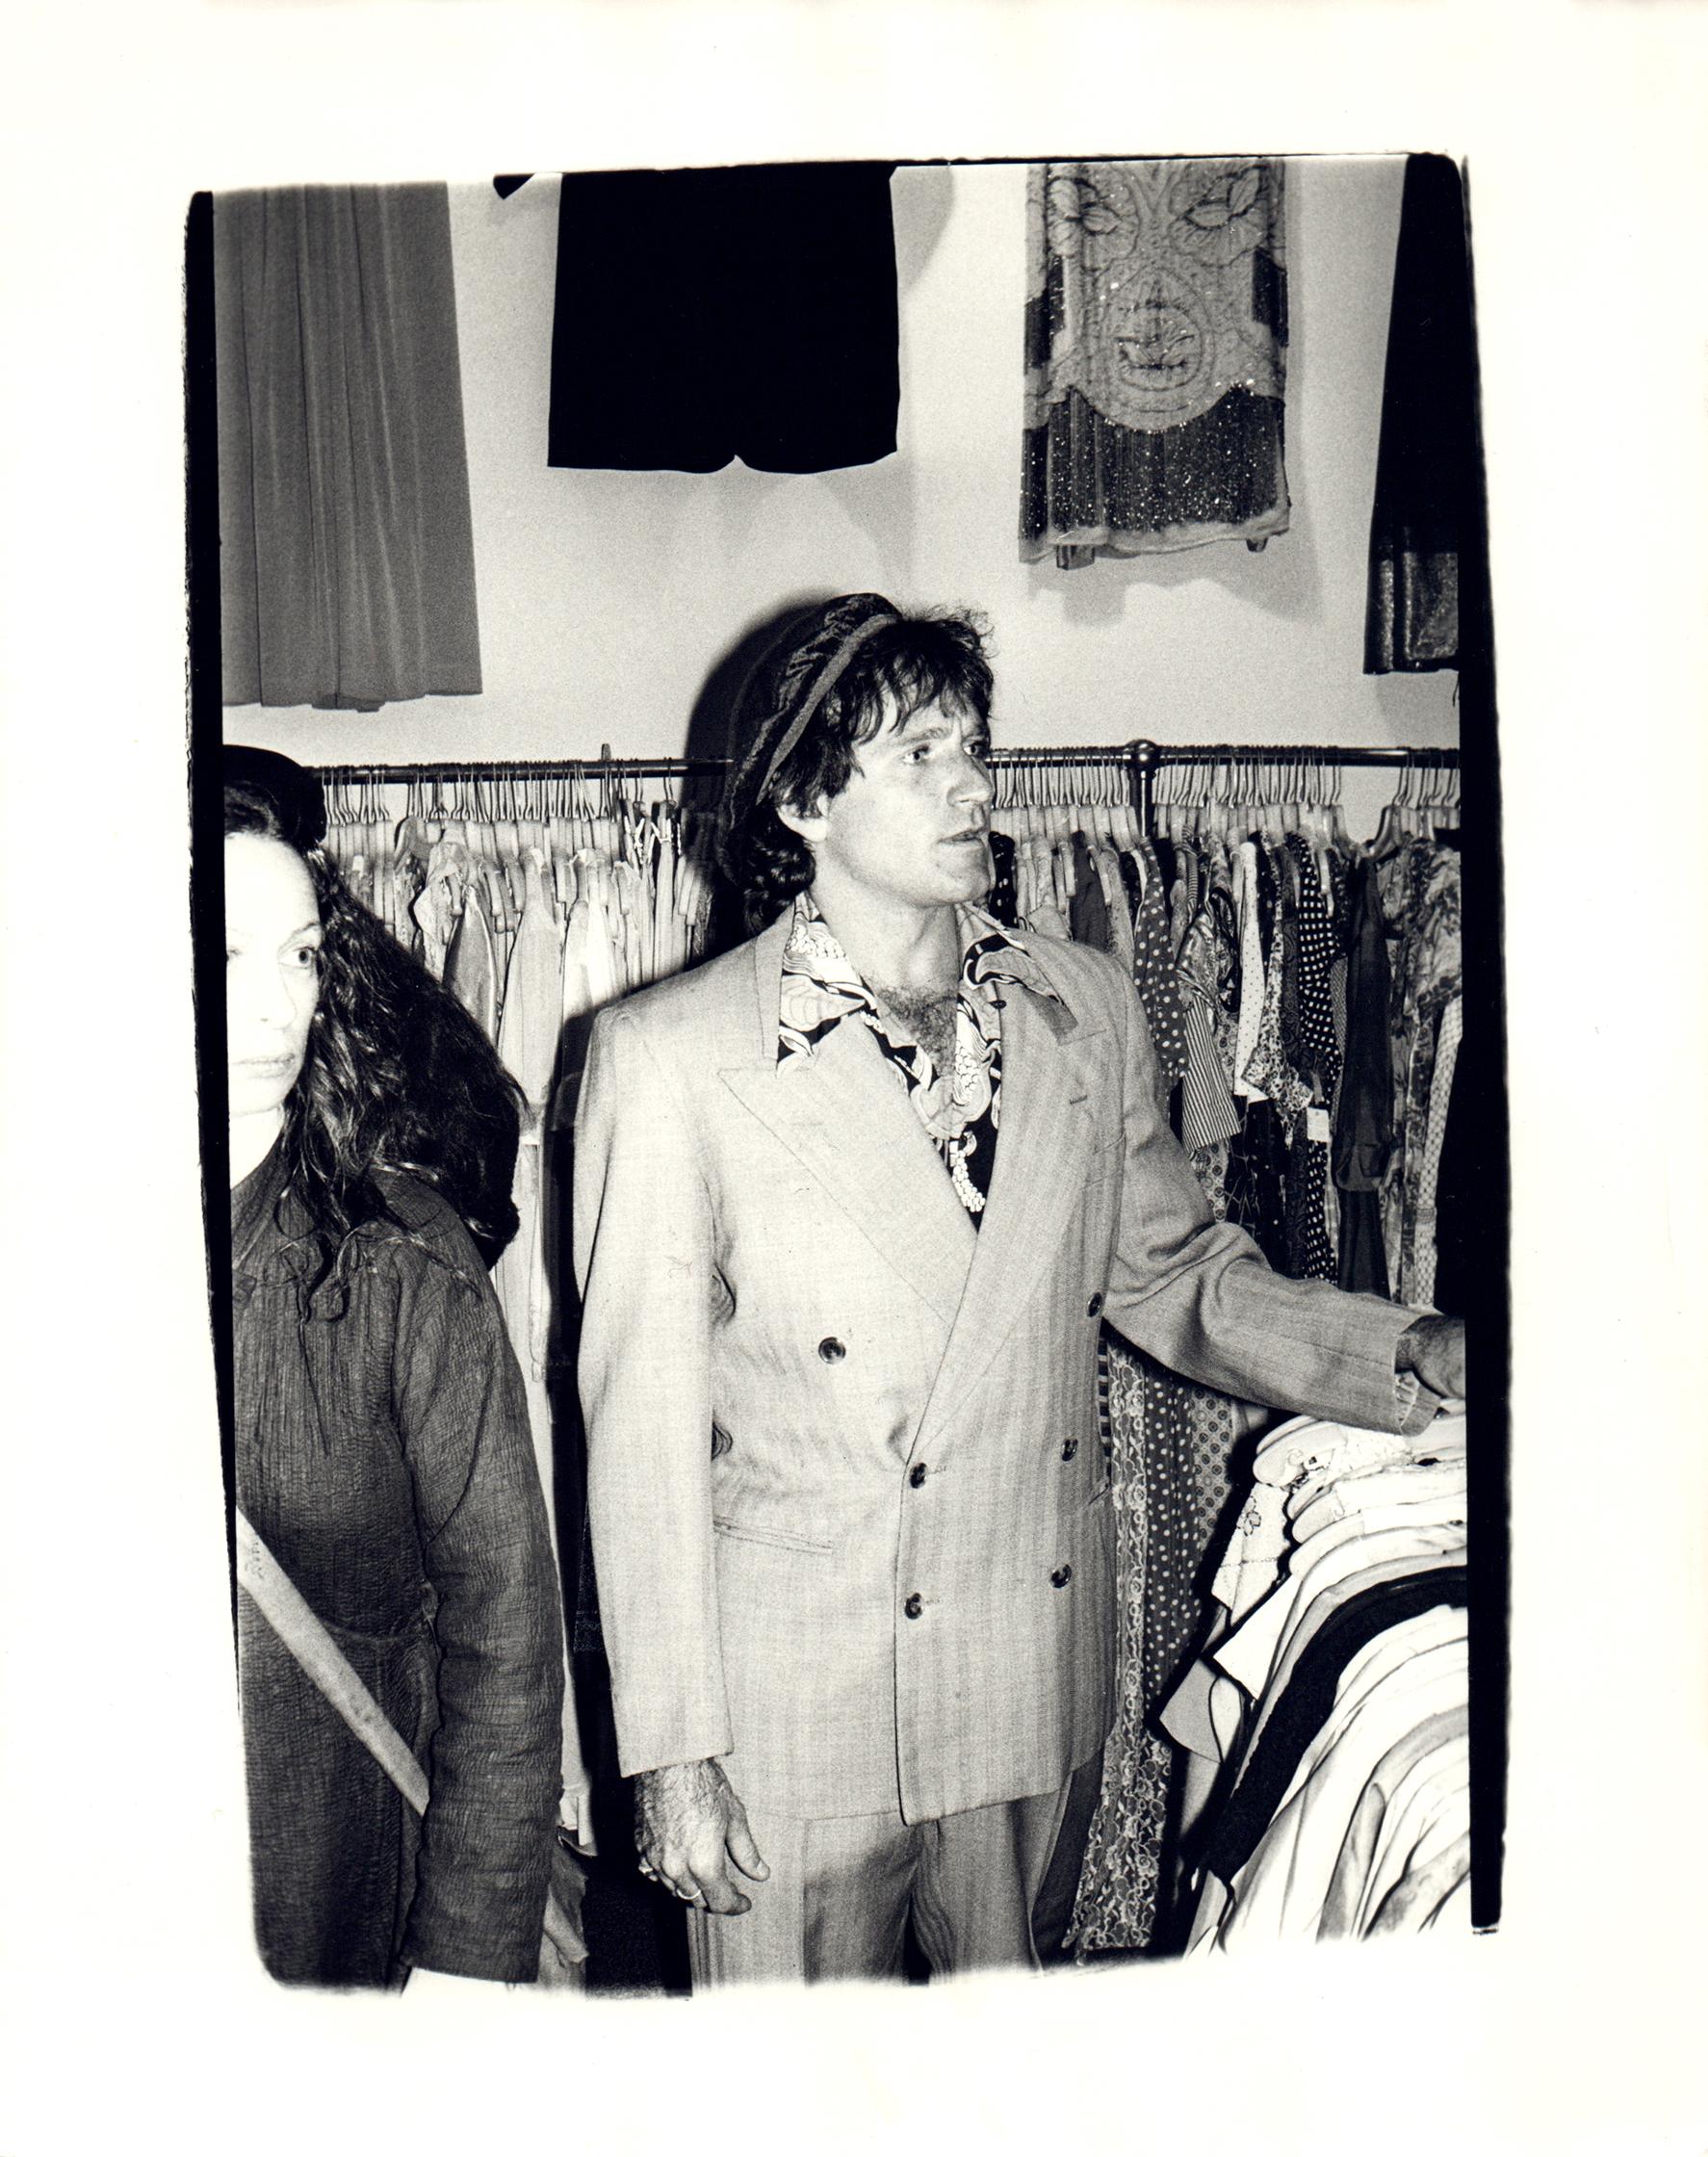 Andy Warhol Black and White Photograph - Photograph of Robin Williams at a Thrift Store in the Village